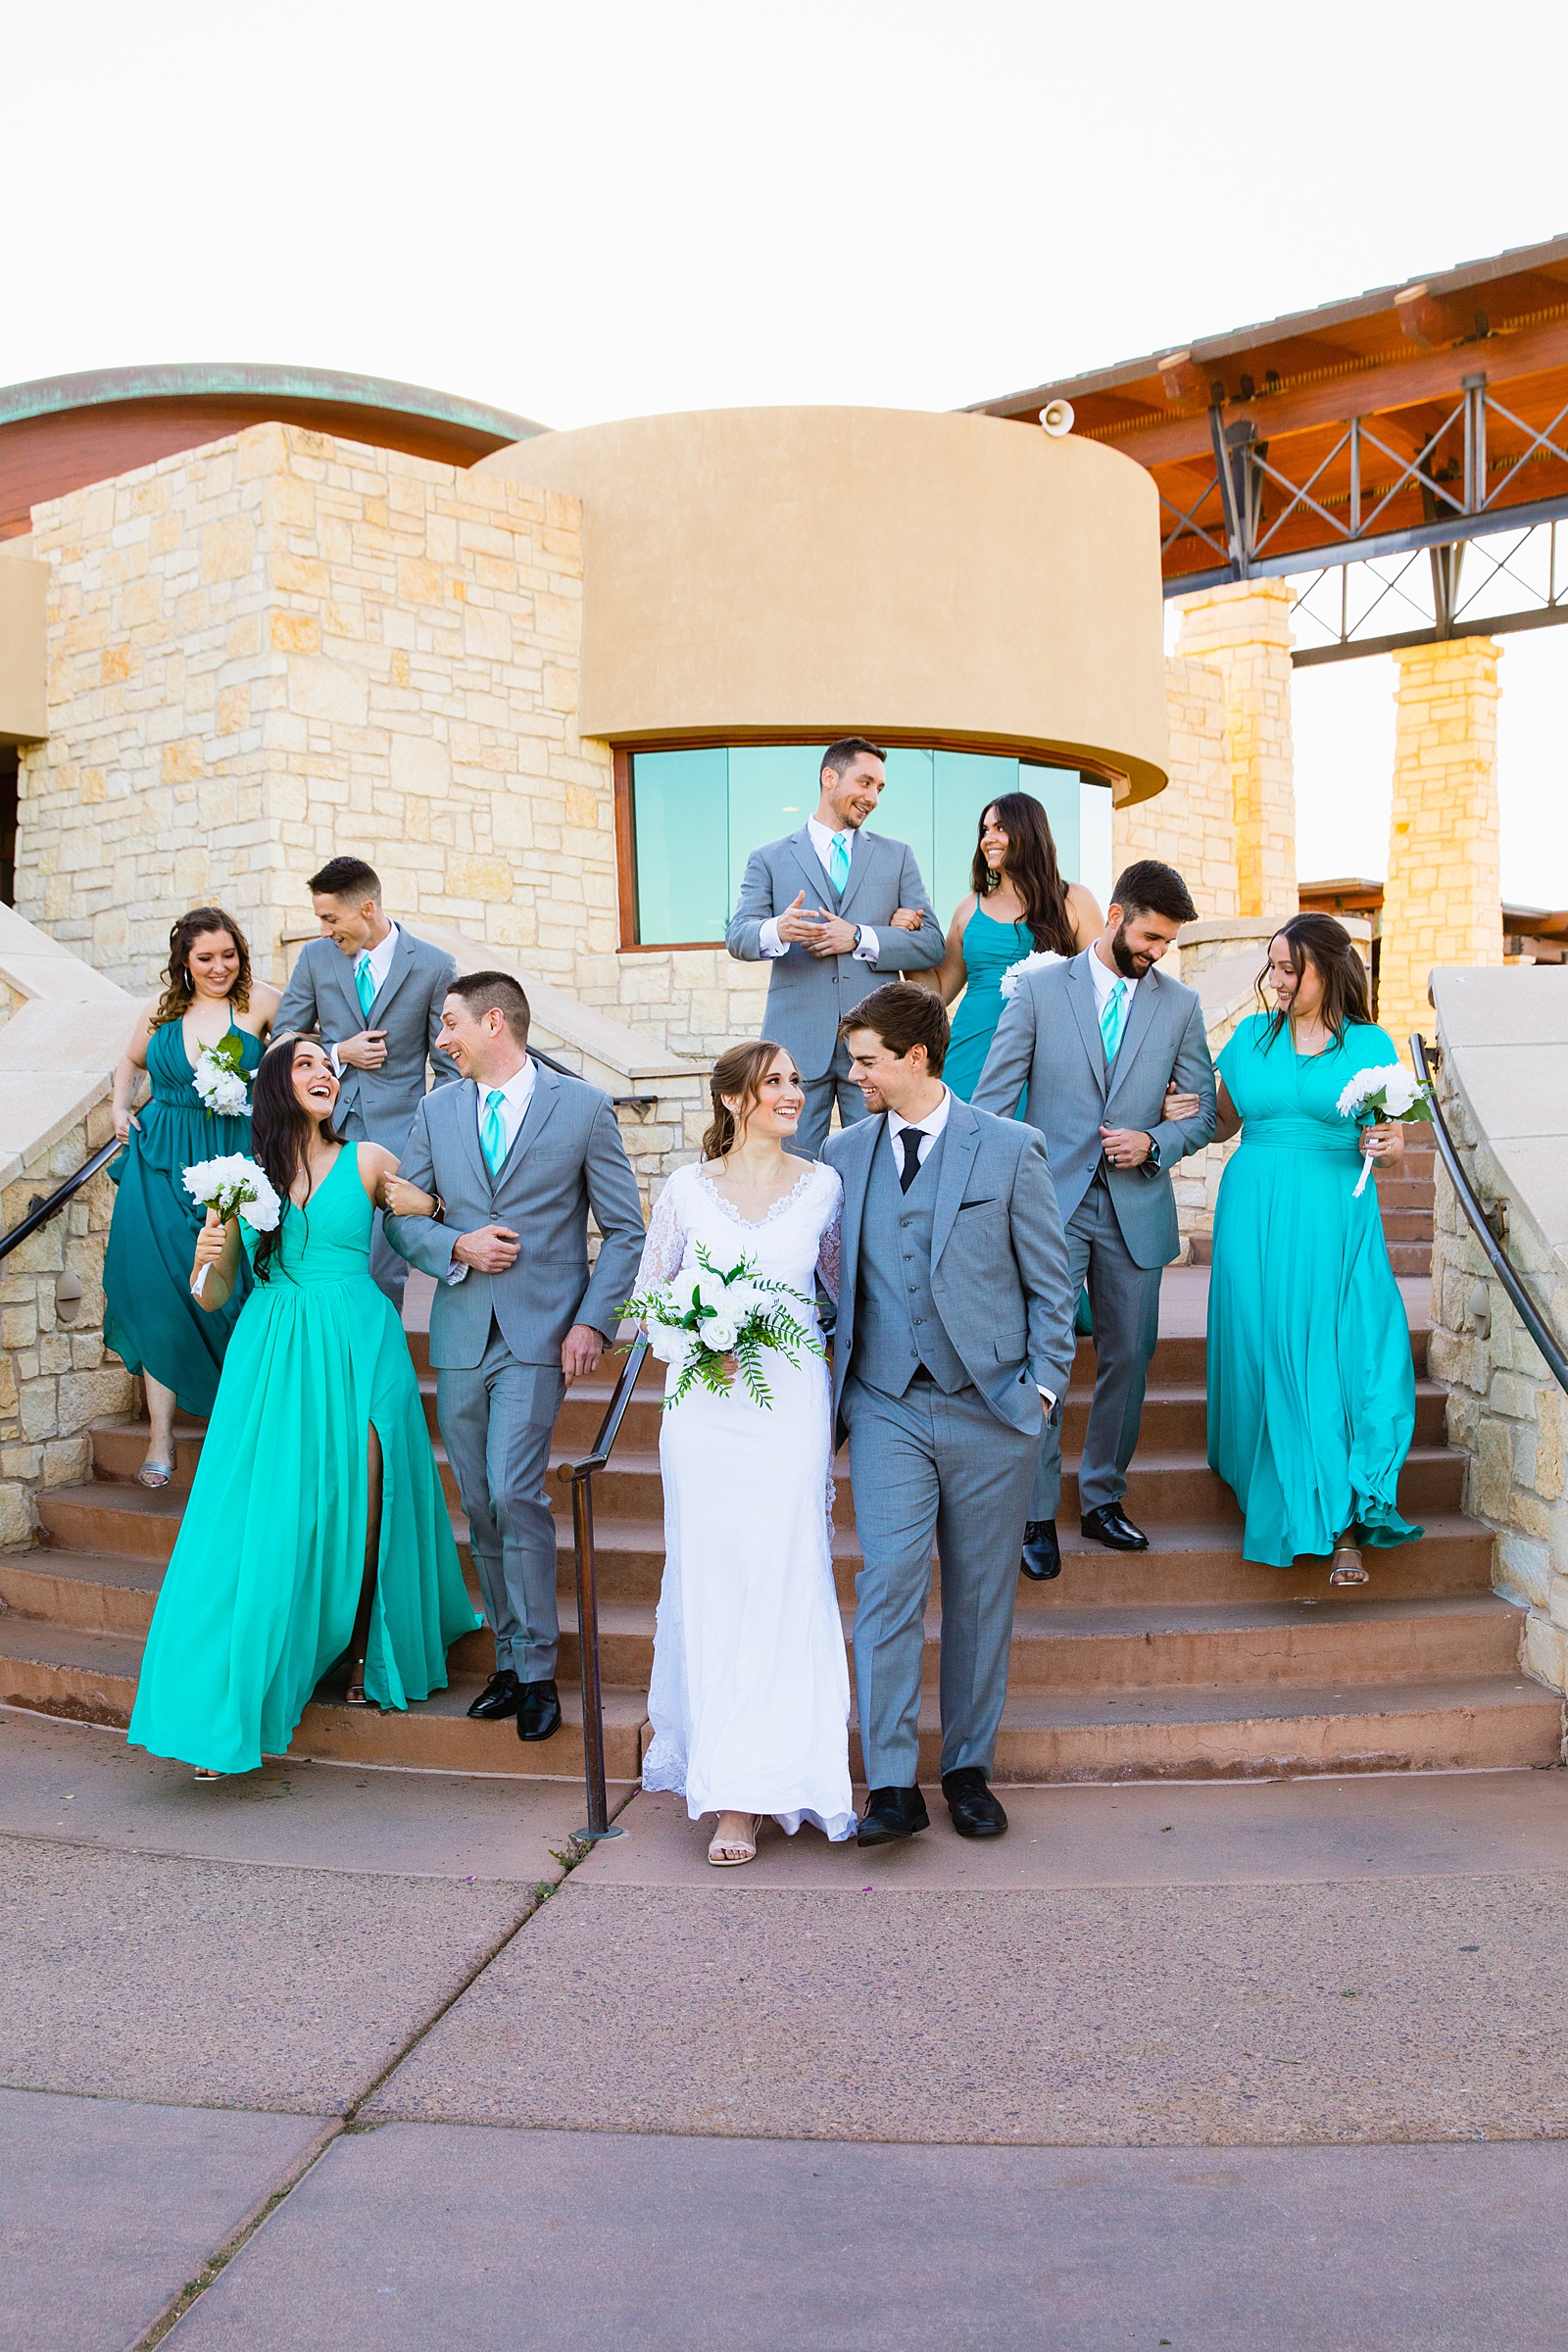 Bridal party laughing together at Ocotillo Oasis wedding by Phoenix wedding photographer PMA Photography.